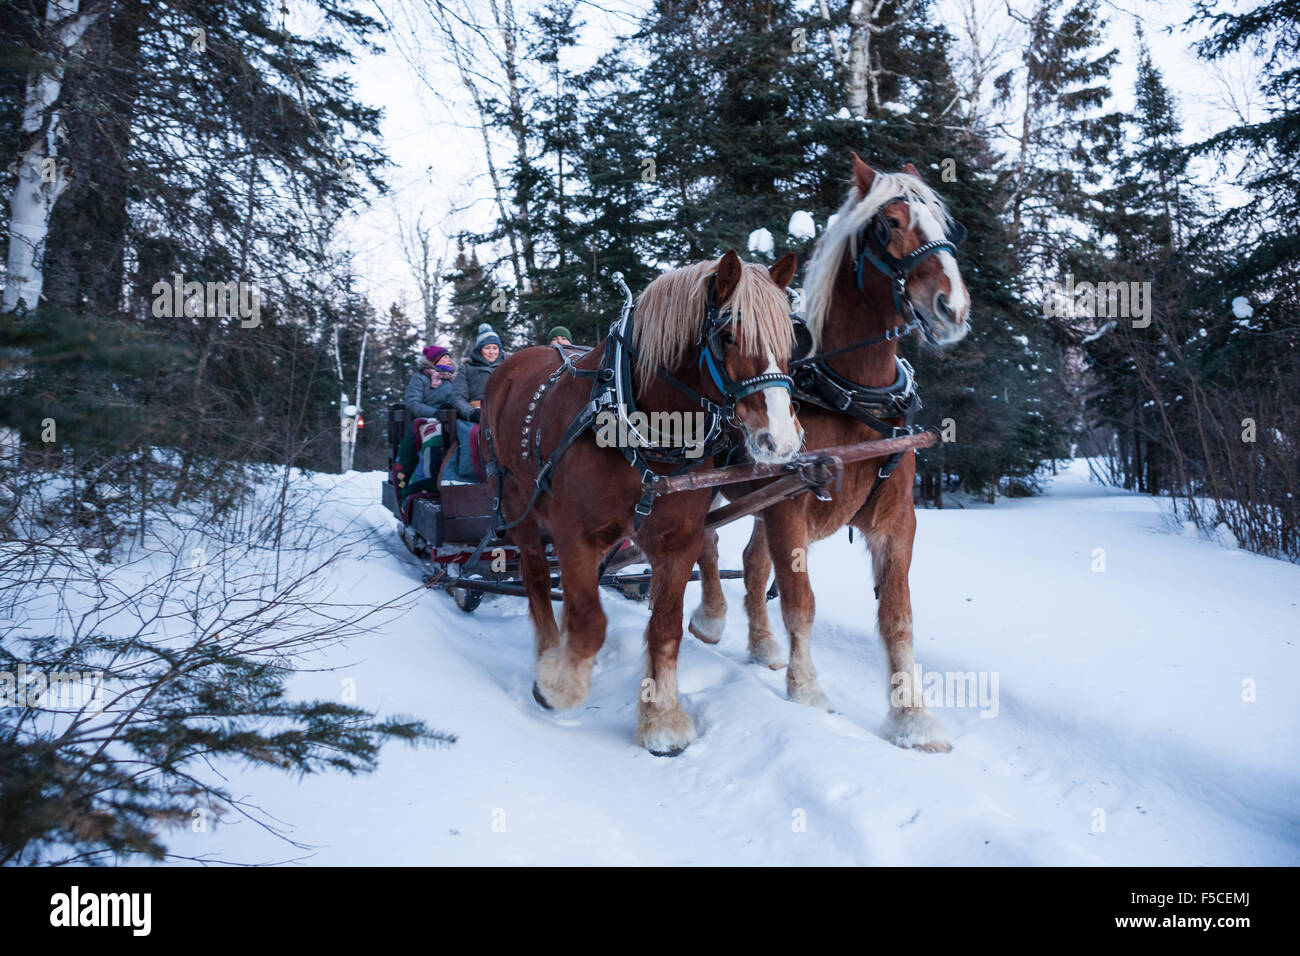 Two Belgium horses pull a sleigh of people through a snowy winter wonderland, Gunflint Trail, MN, USA Stock Photo